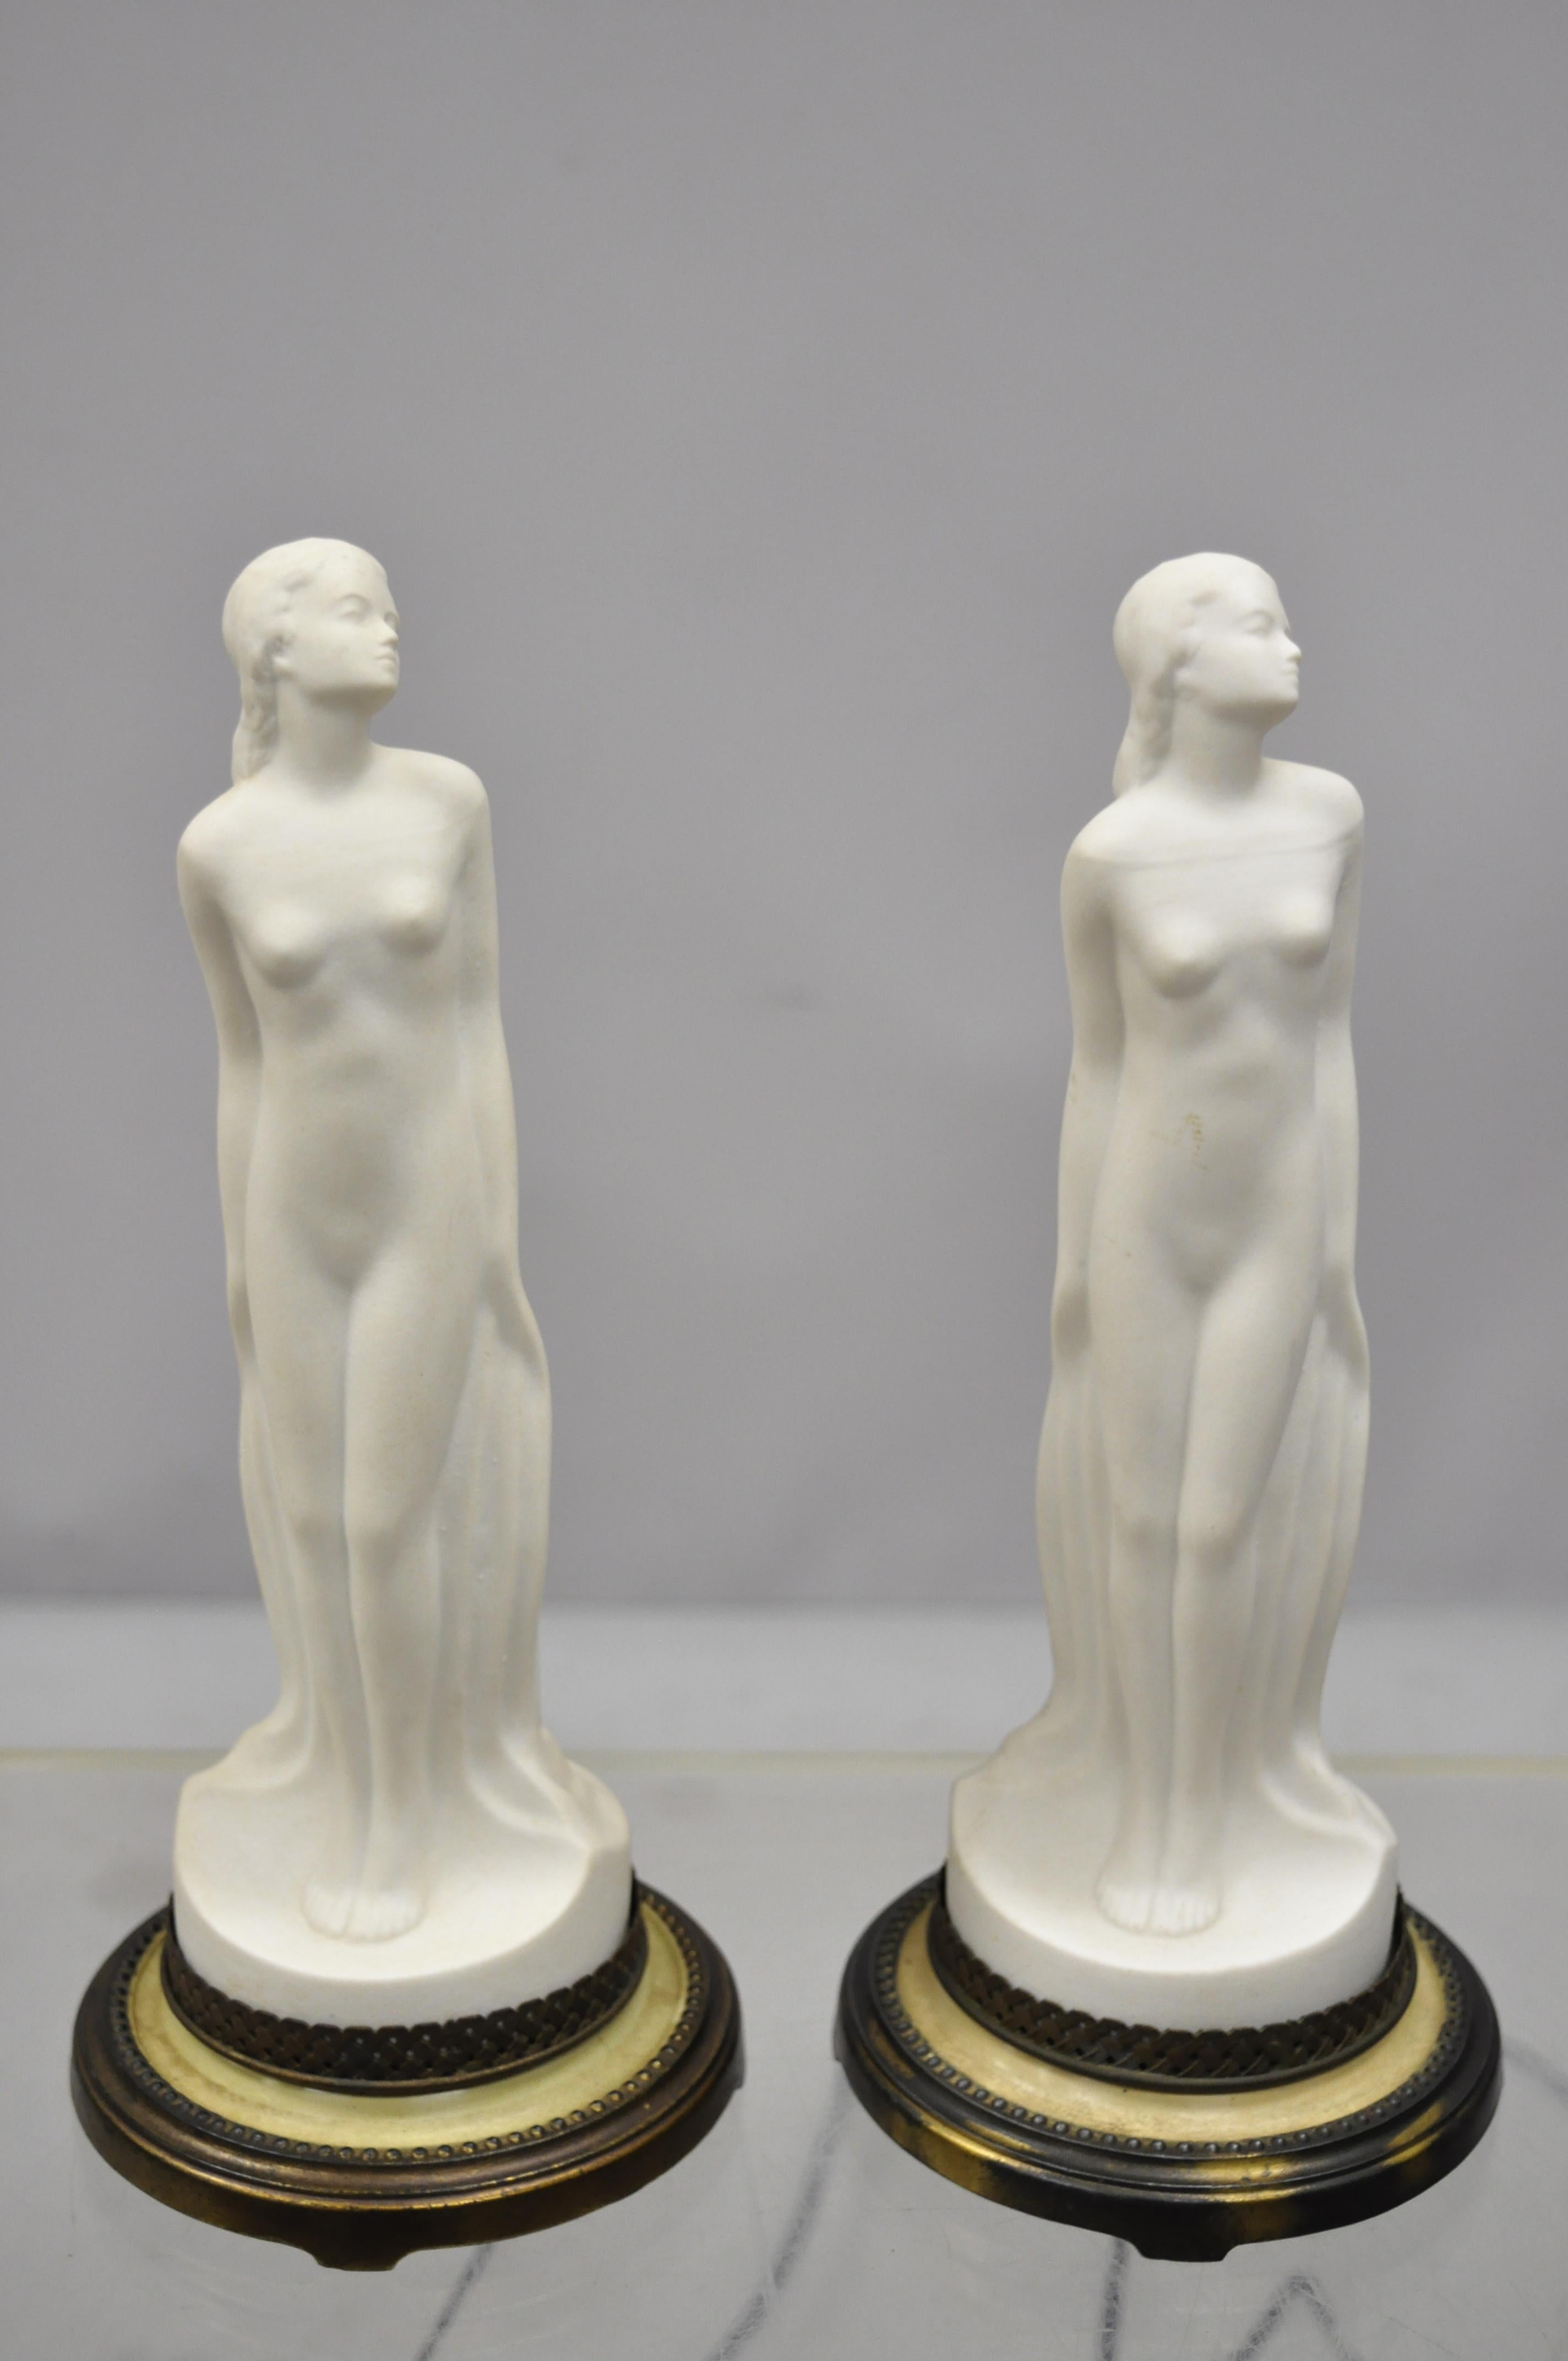 Pair of vintage Art Nouveau French style ceramic figural woman Boudoir table lamps. Listing includes ceramic figural female forms, single light socket, metal base, very nice vintage item, great style and form, circa mid-20th century. Measurements: